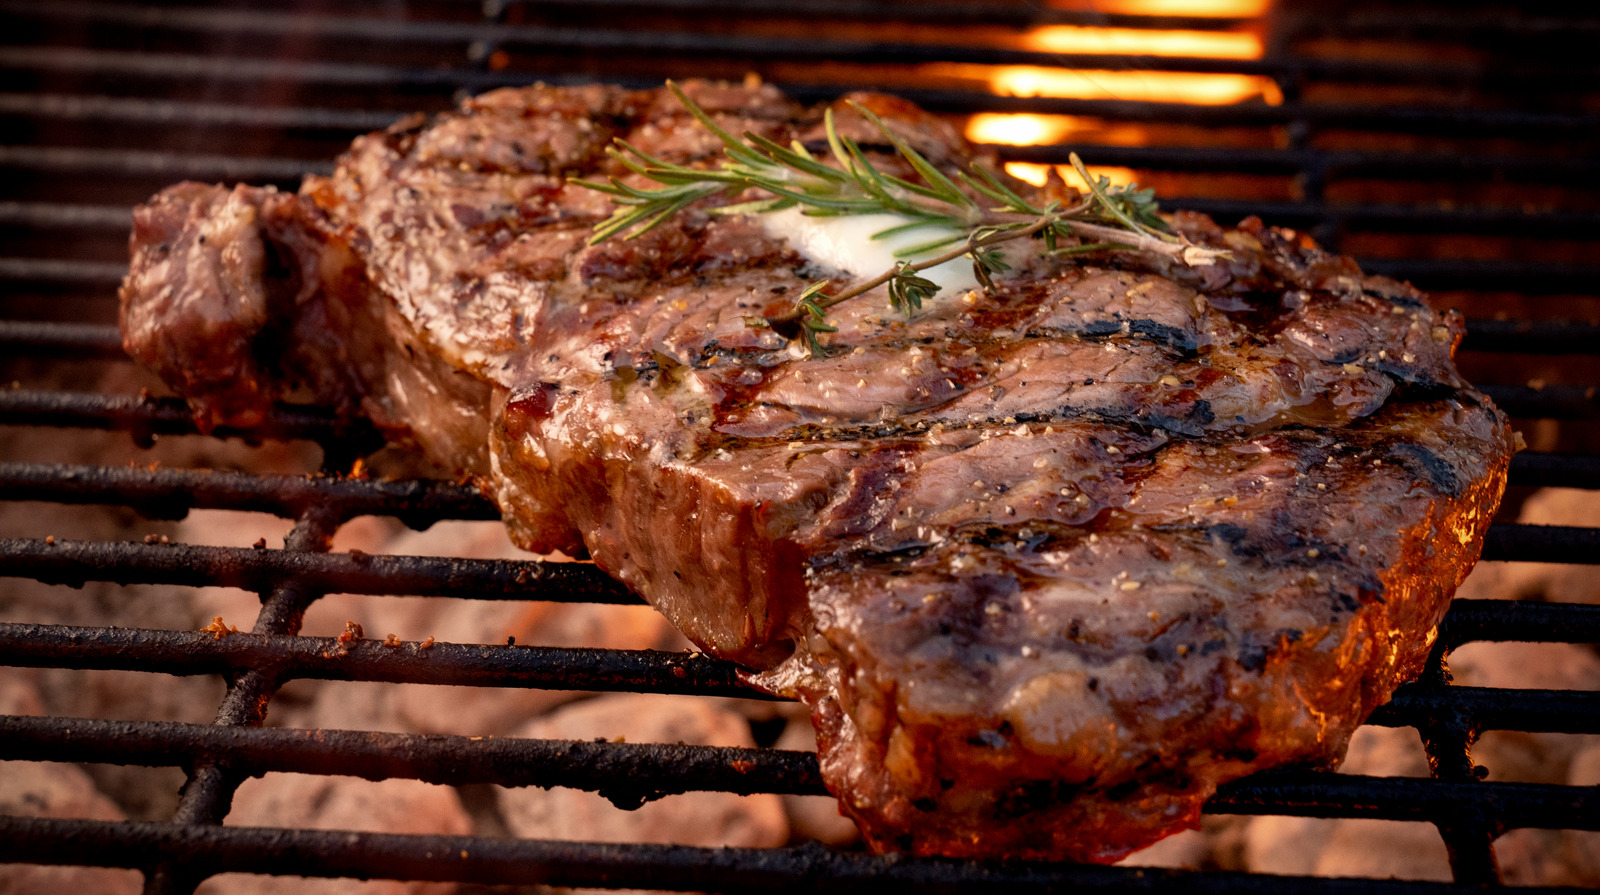 https://www.tastingtable.com/img/gallery/12-essential-tips-for-grilling-steak-according-to-hugh-acheson/l-intro-1687350789.jpg